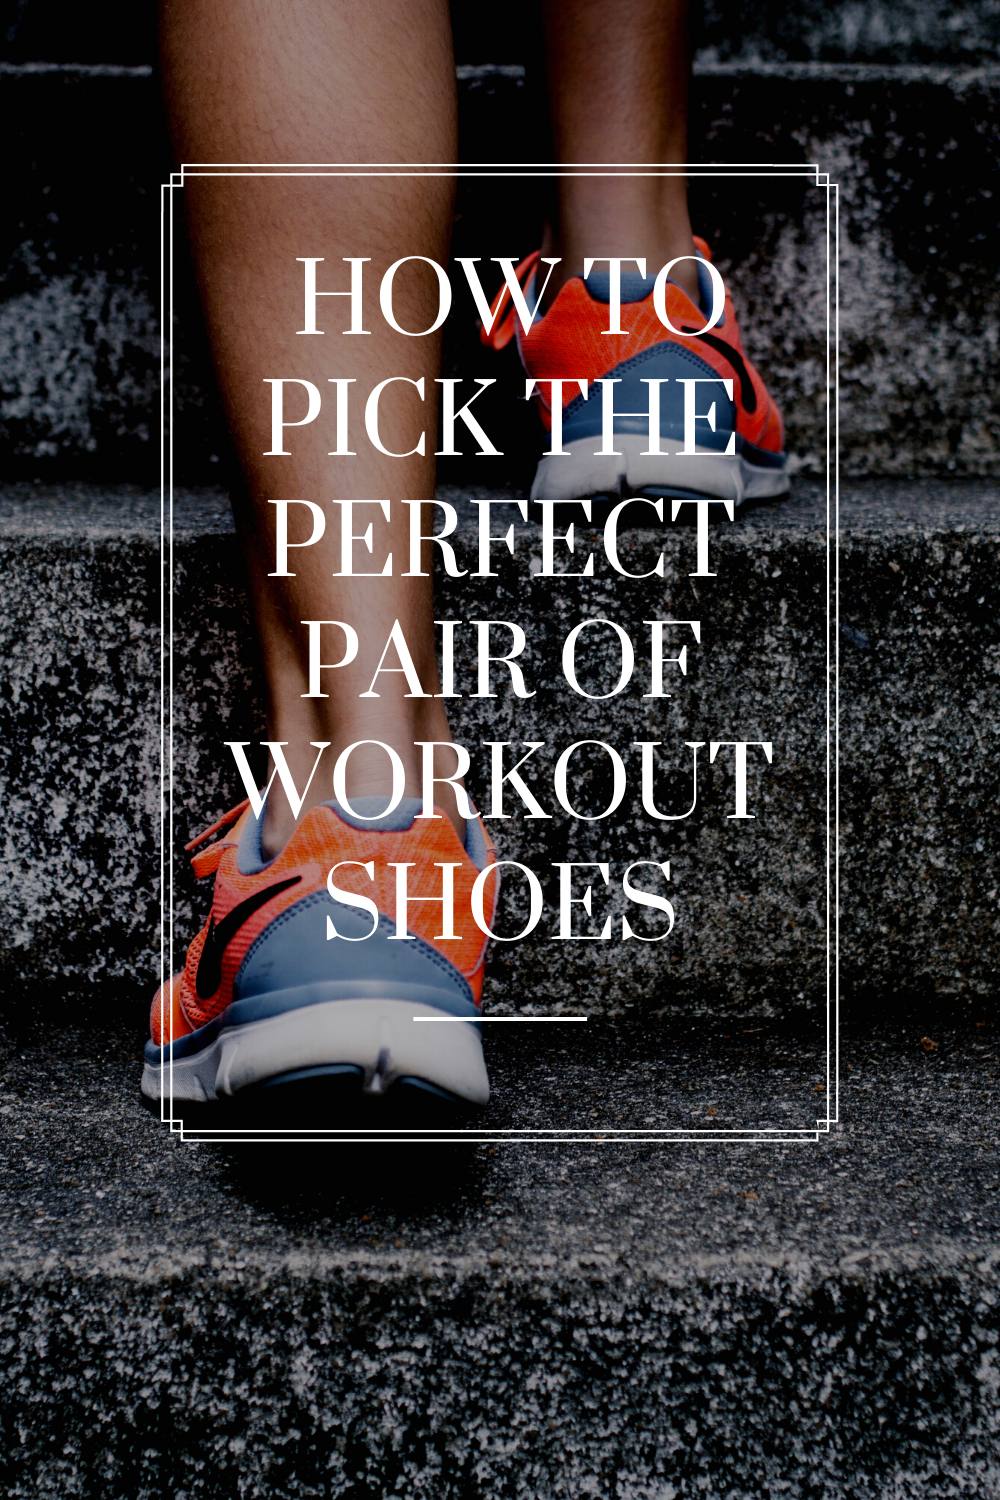 How to Pick the Perfect Pair of Workout Shoes